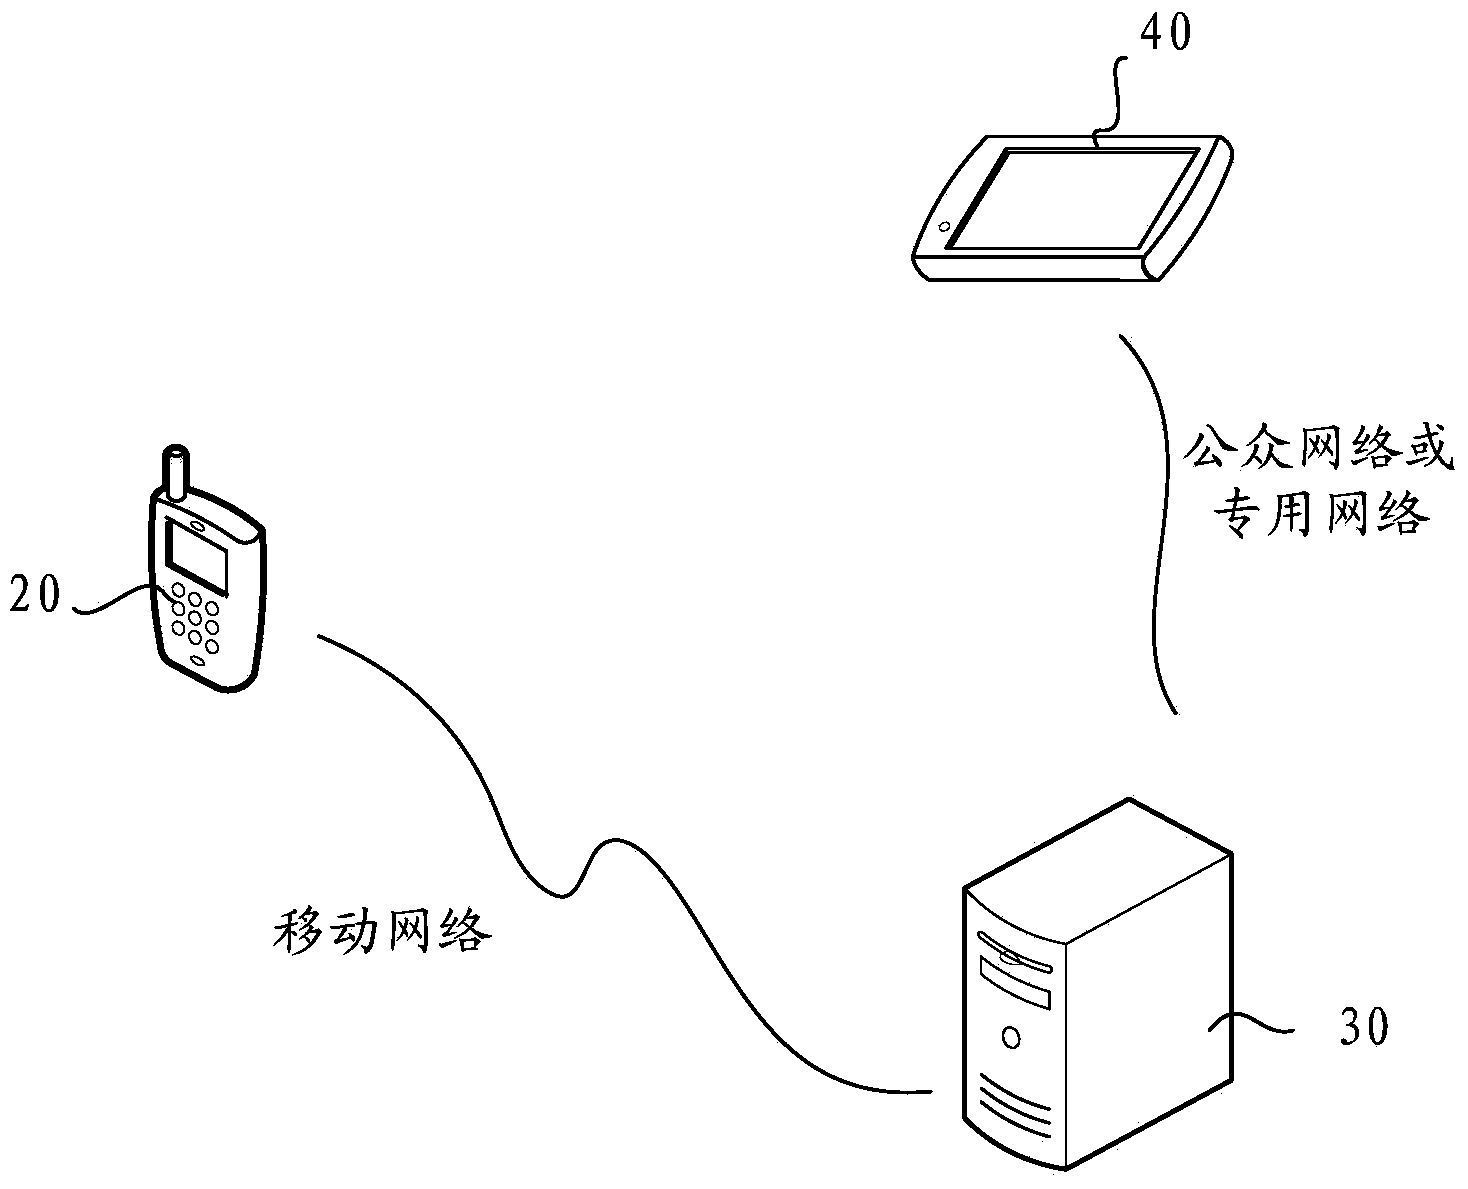 Method and system with detecting, participating, payment processing and client rewarding functions